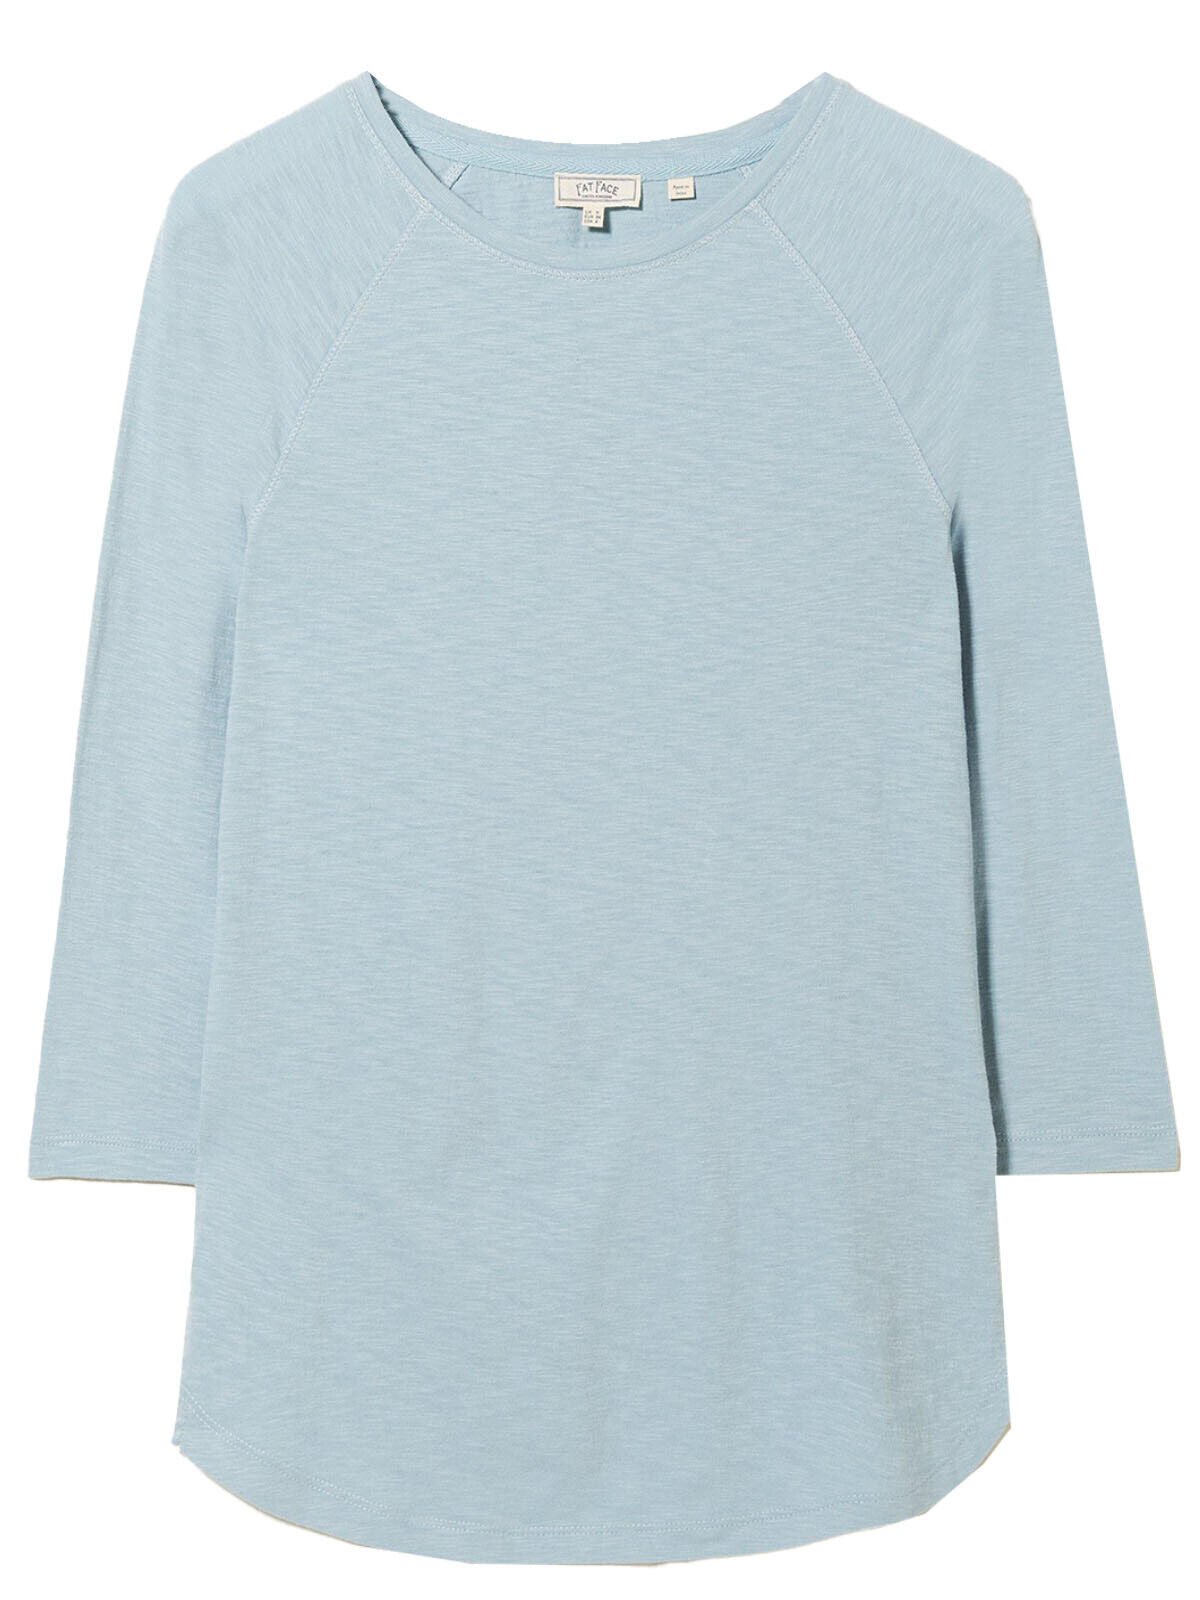 EX Fat Face Duck Egg Eve Raglan Top in Sizes 8, 10, 12, 14, 16 RRP £24